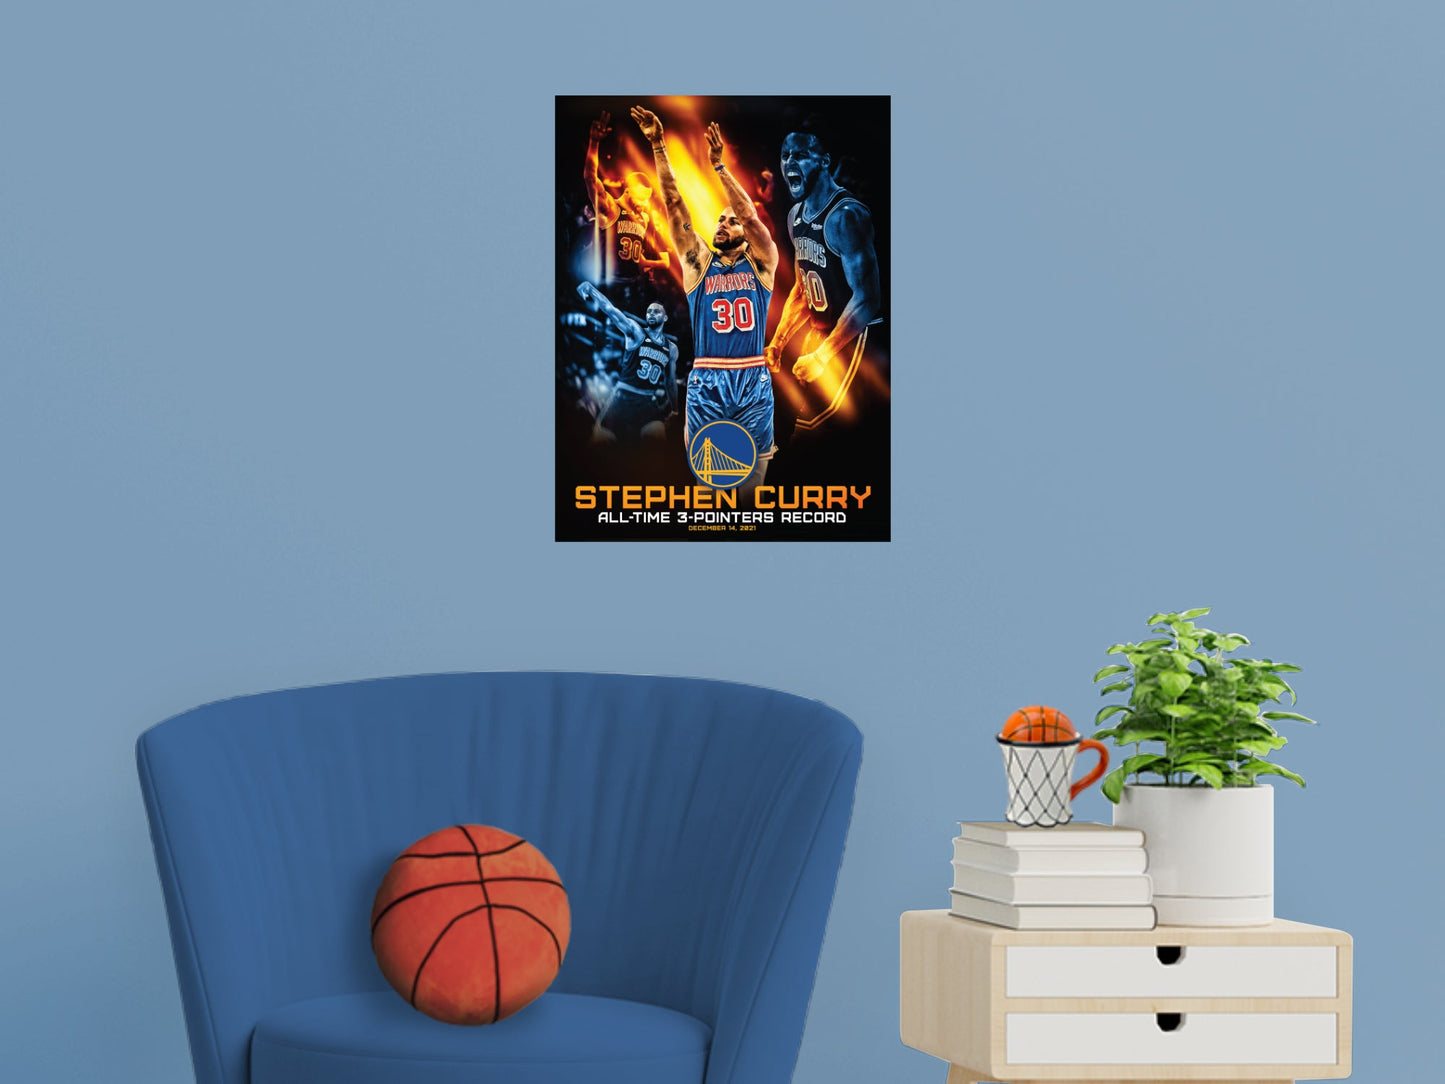 Golden State Warriors: Stephen Curry 3-Point Leader Poster - Officially Licensed NBA Removable Adhesive Decal